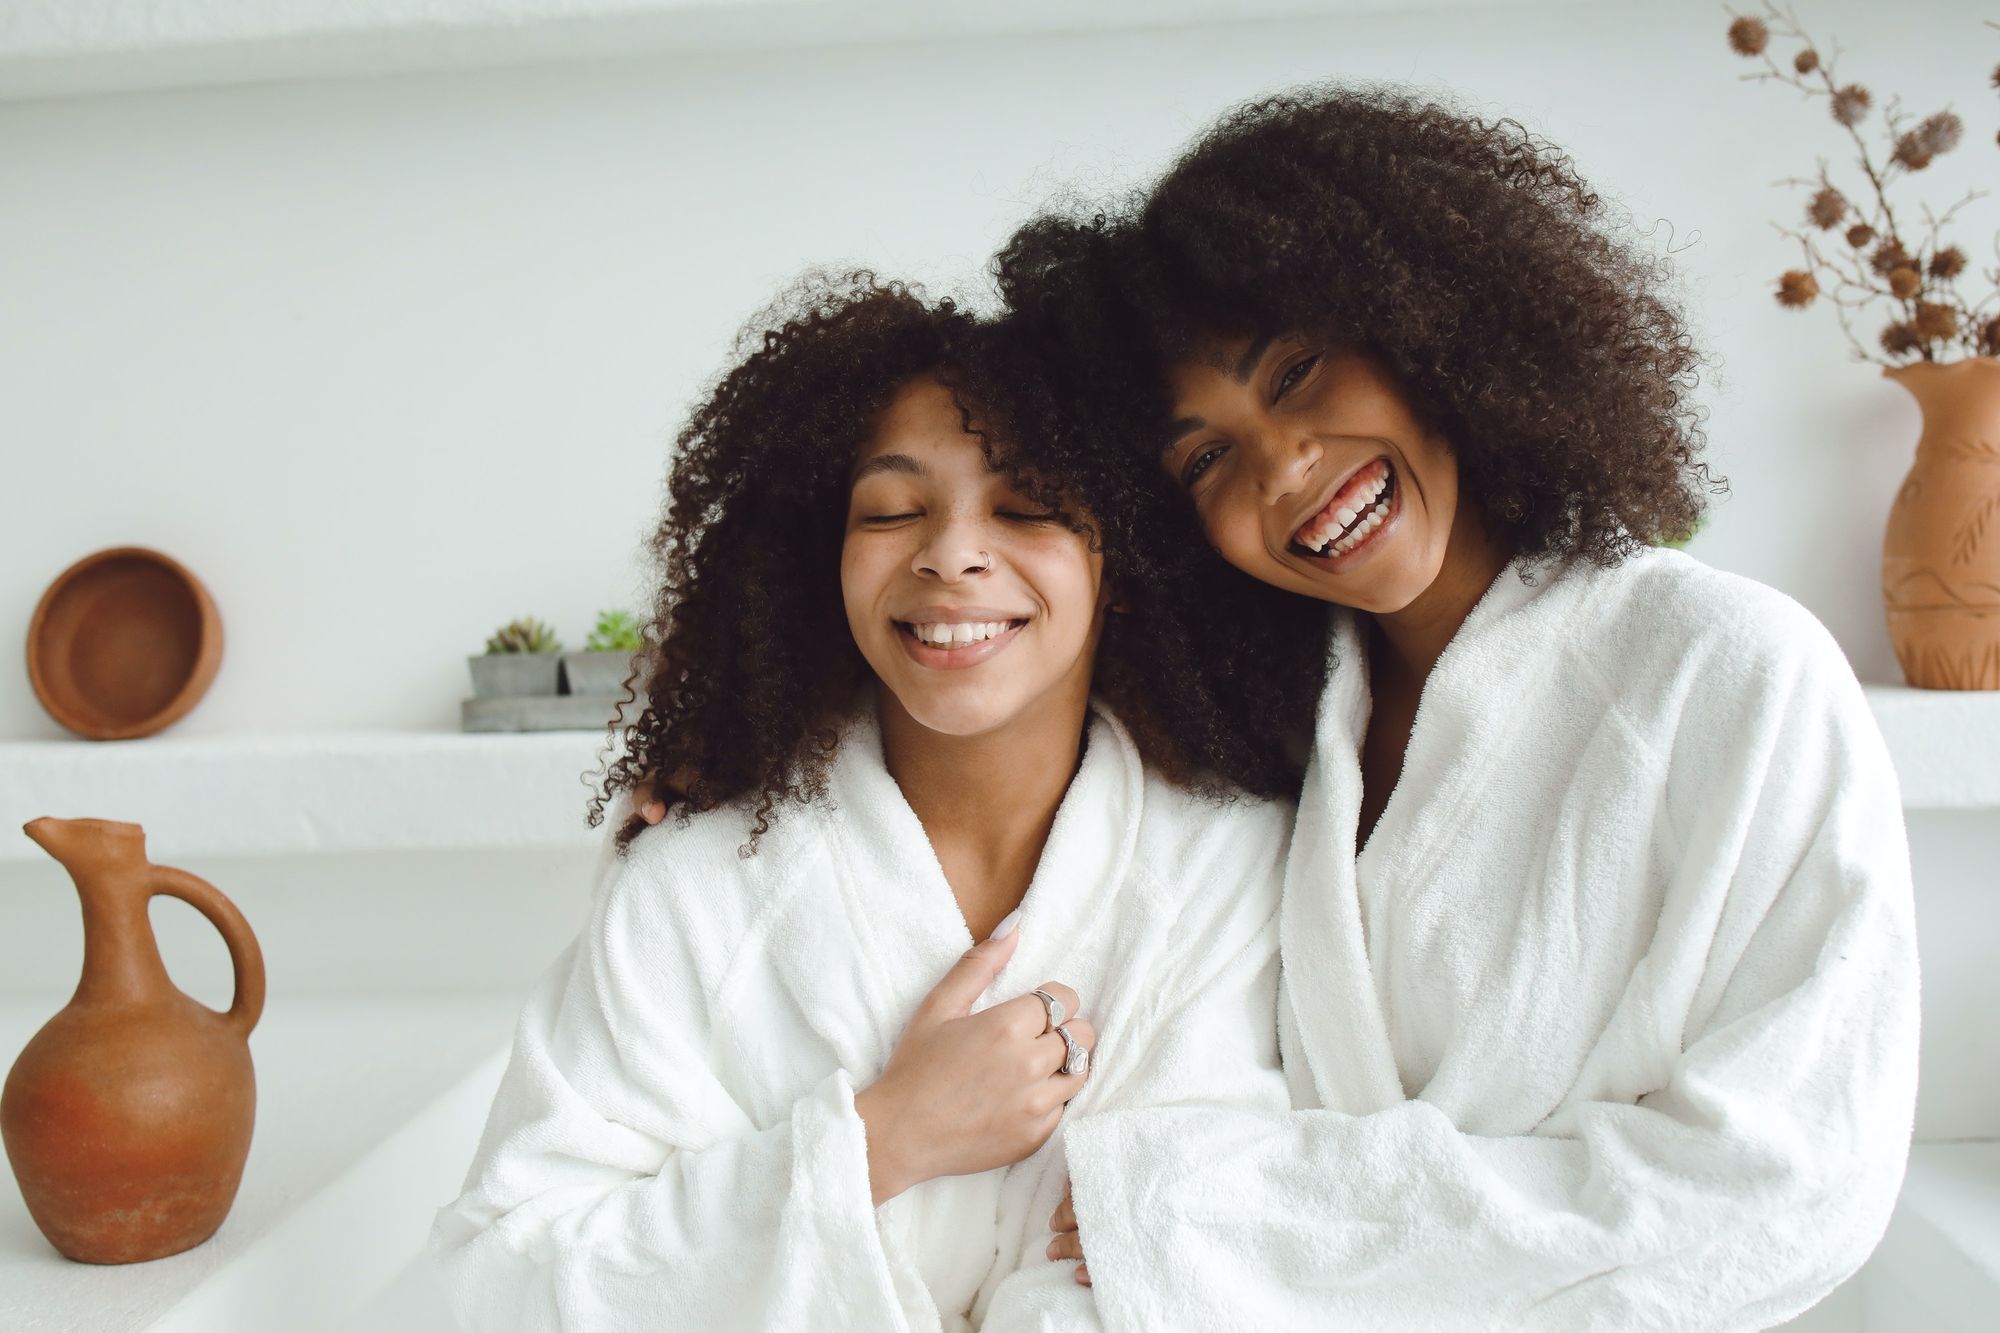                      27 Black-Owned Health & Wellness Brands to Get Your Life Right                             
                     